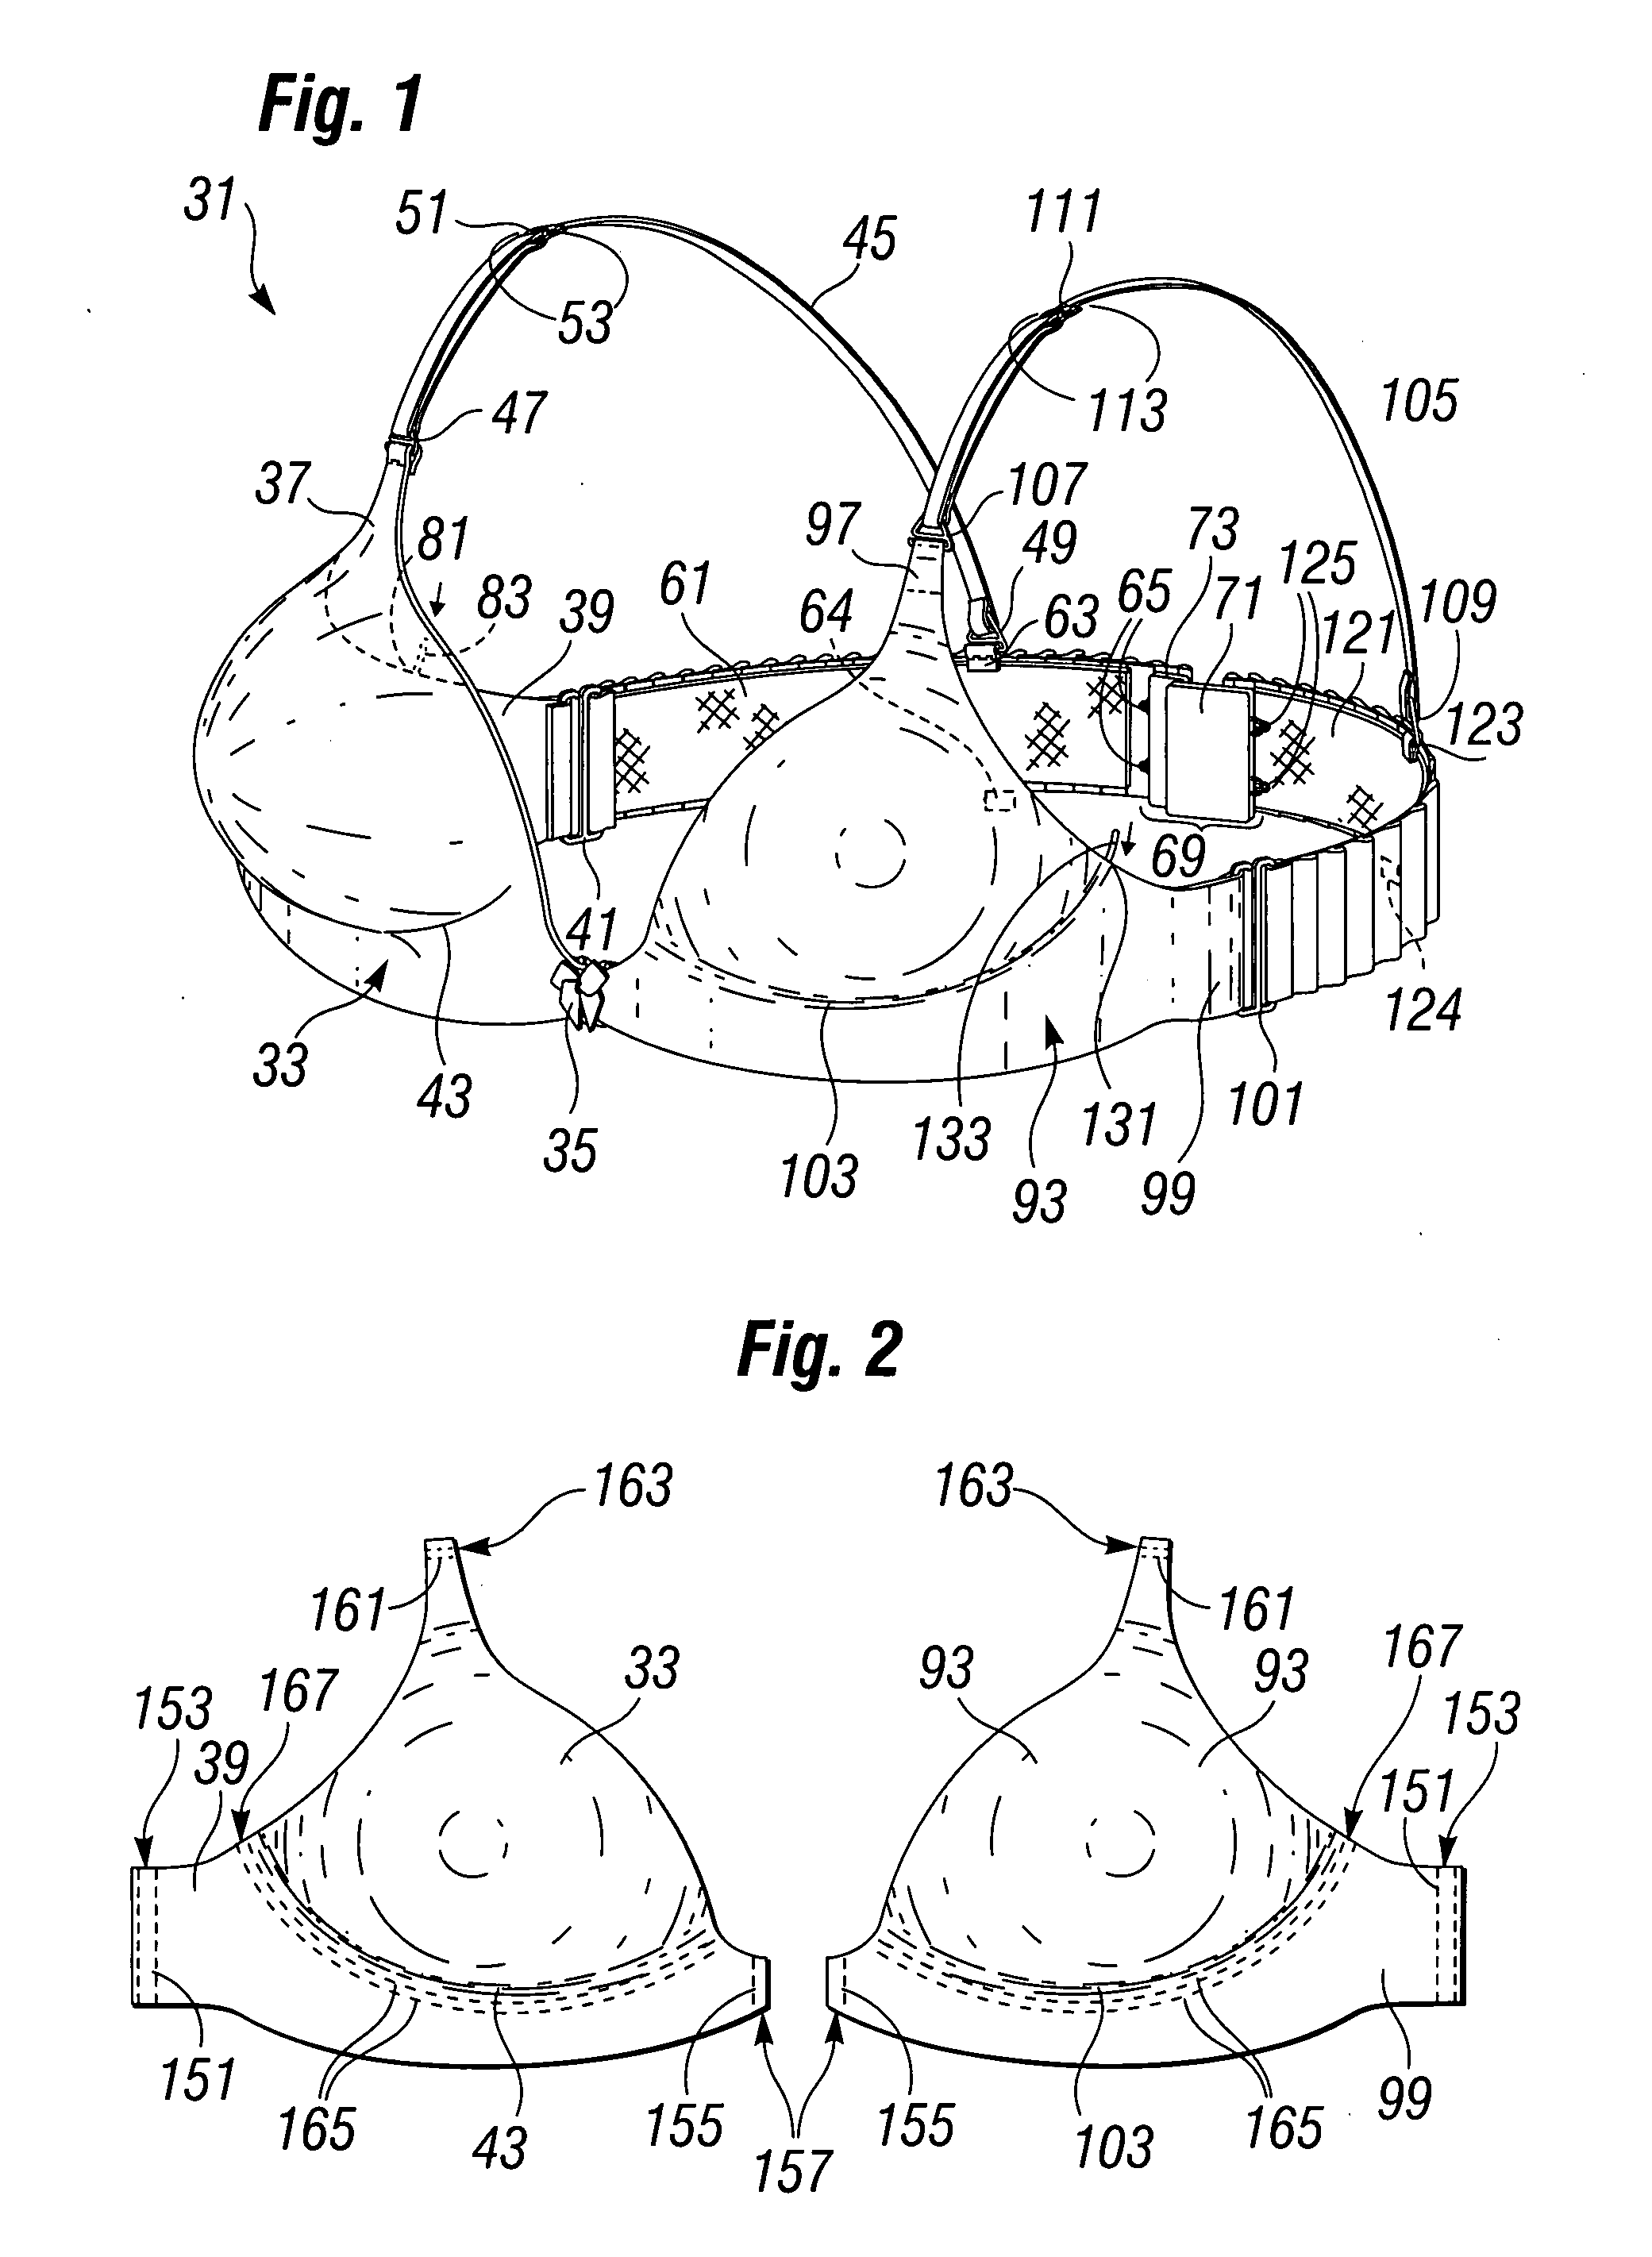 User constructed multi component bra system